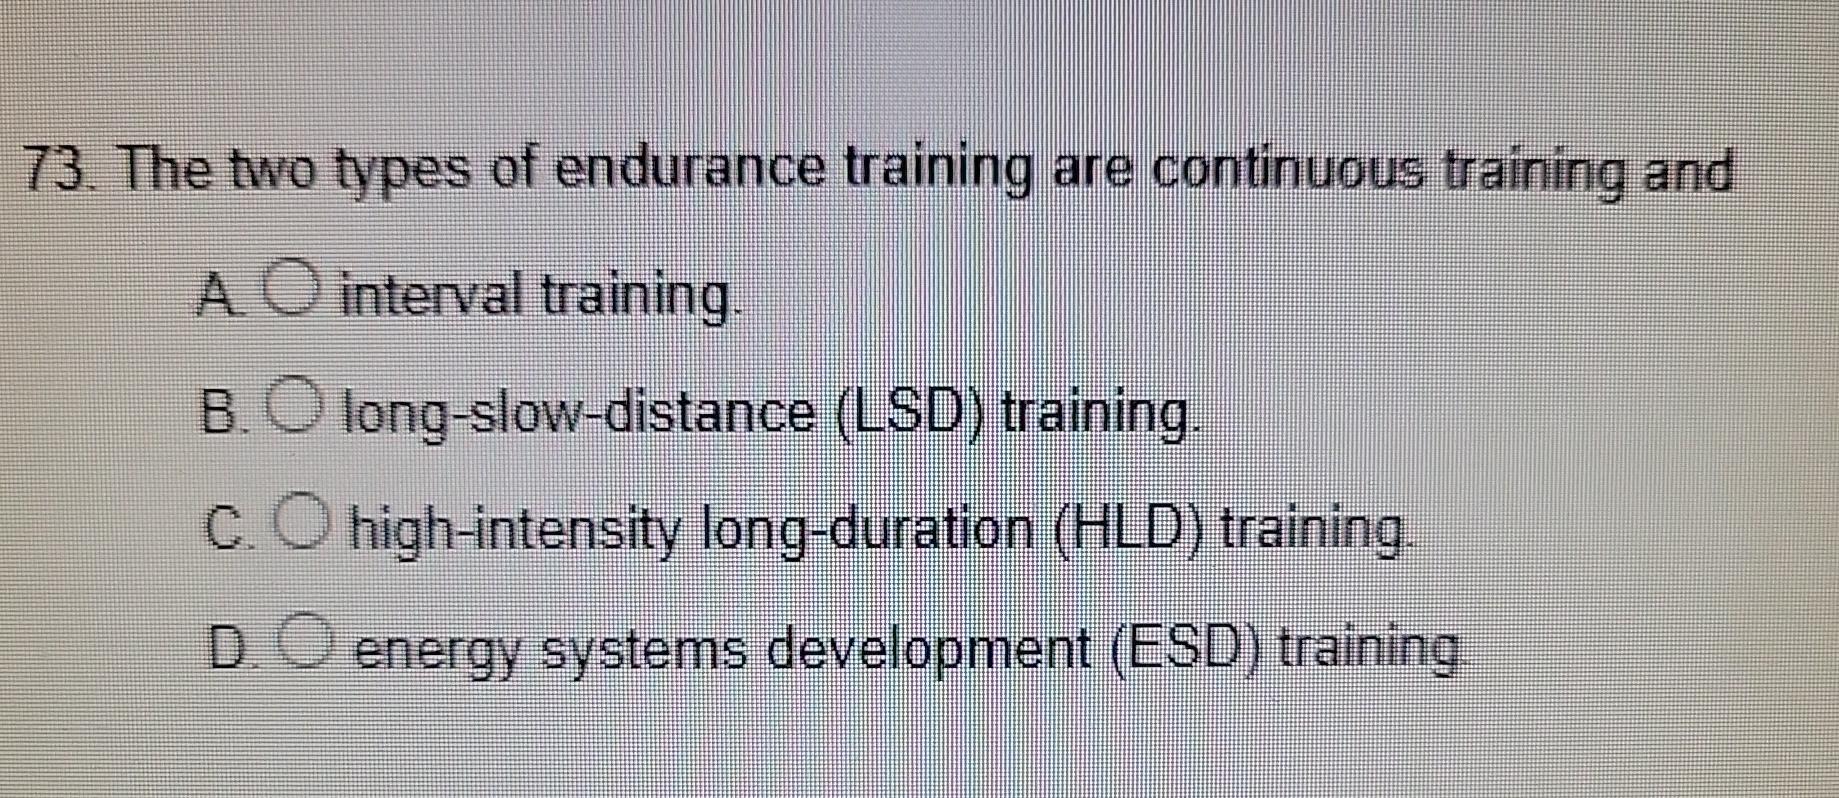 What are the types of endurance training?